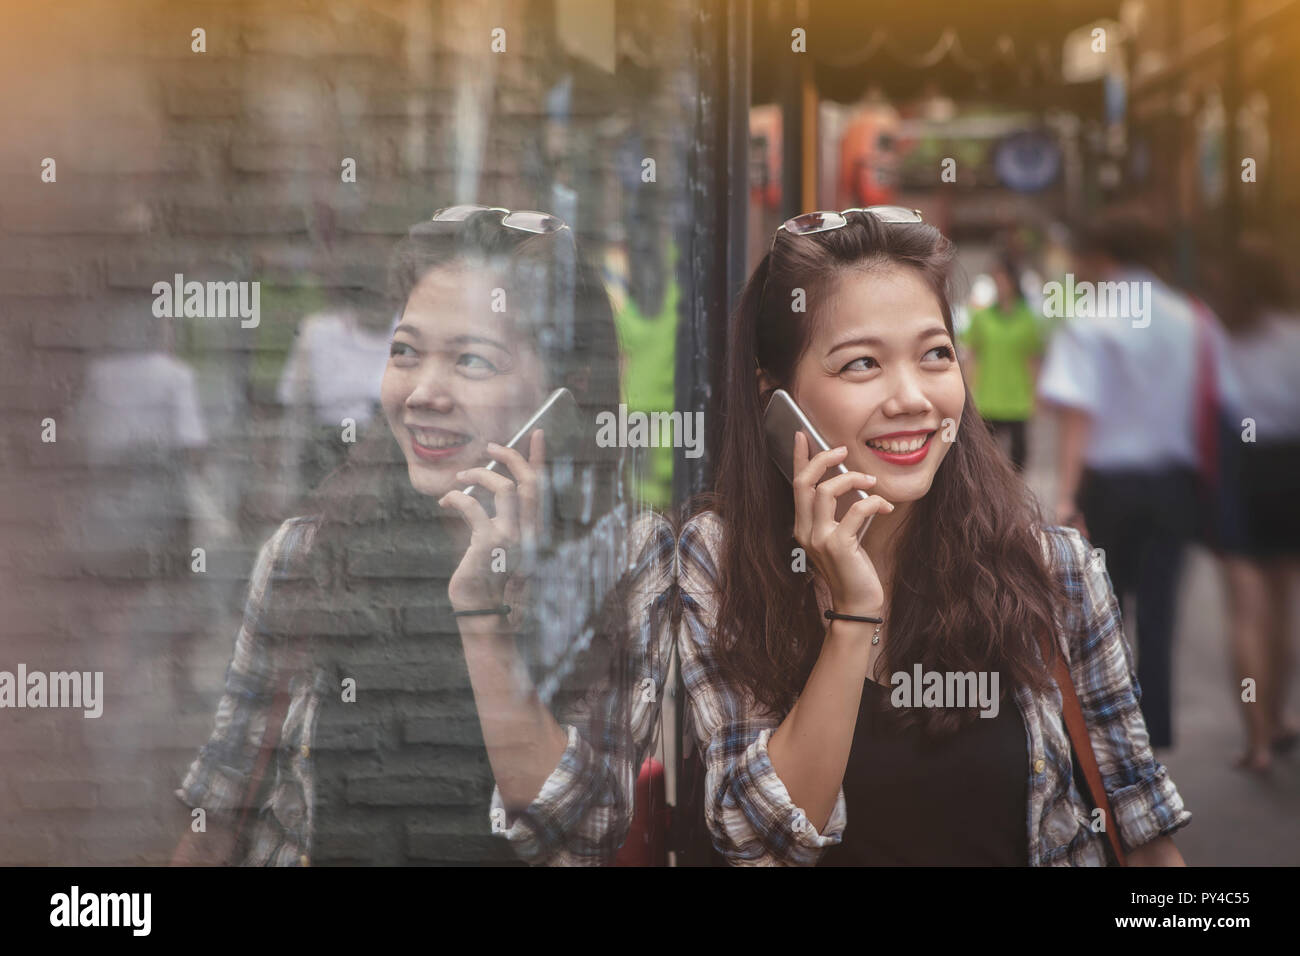 asian yonger woman toothy smiling face talking on mobile phone happiness emotion Stock Photo